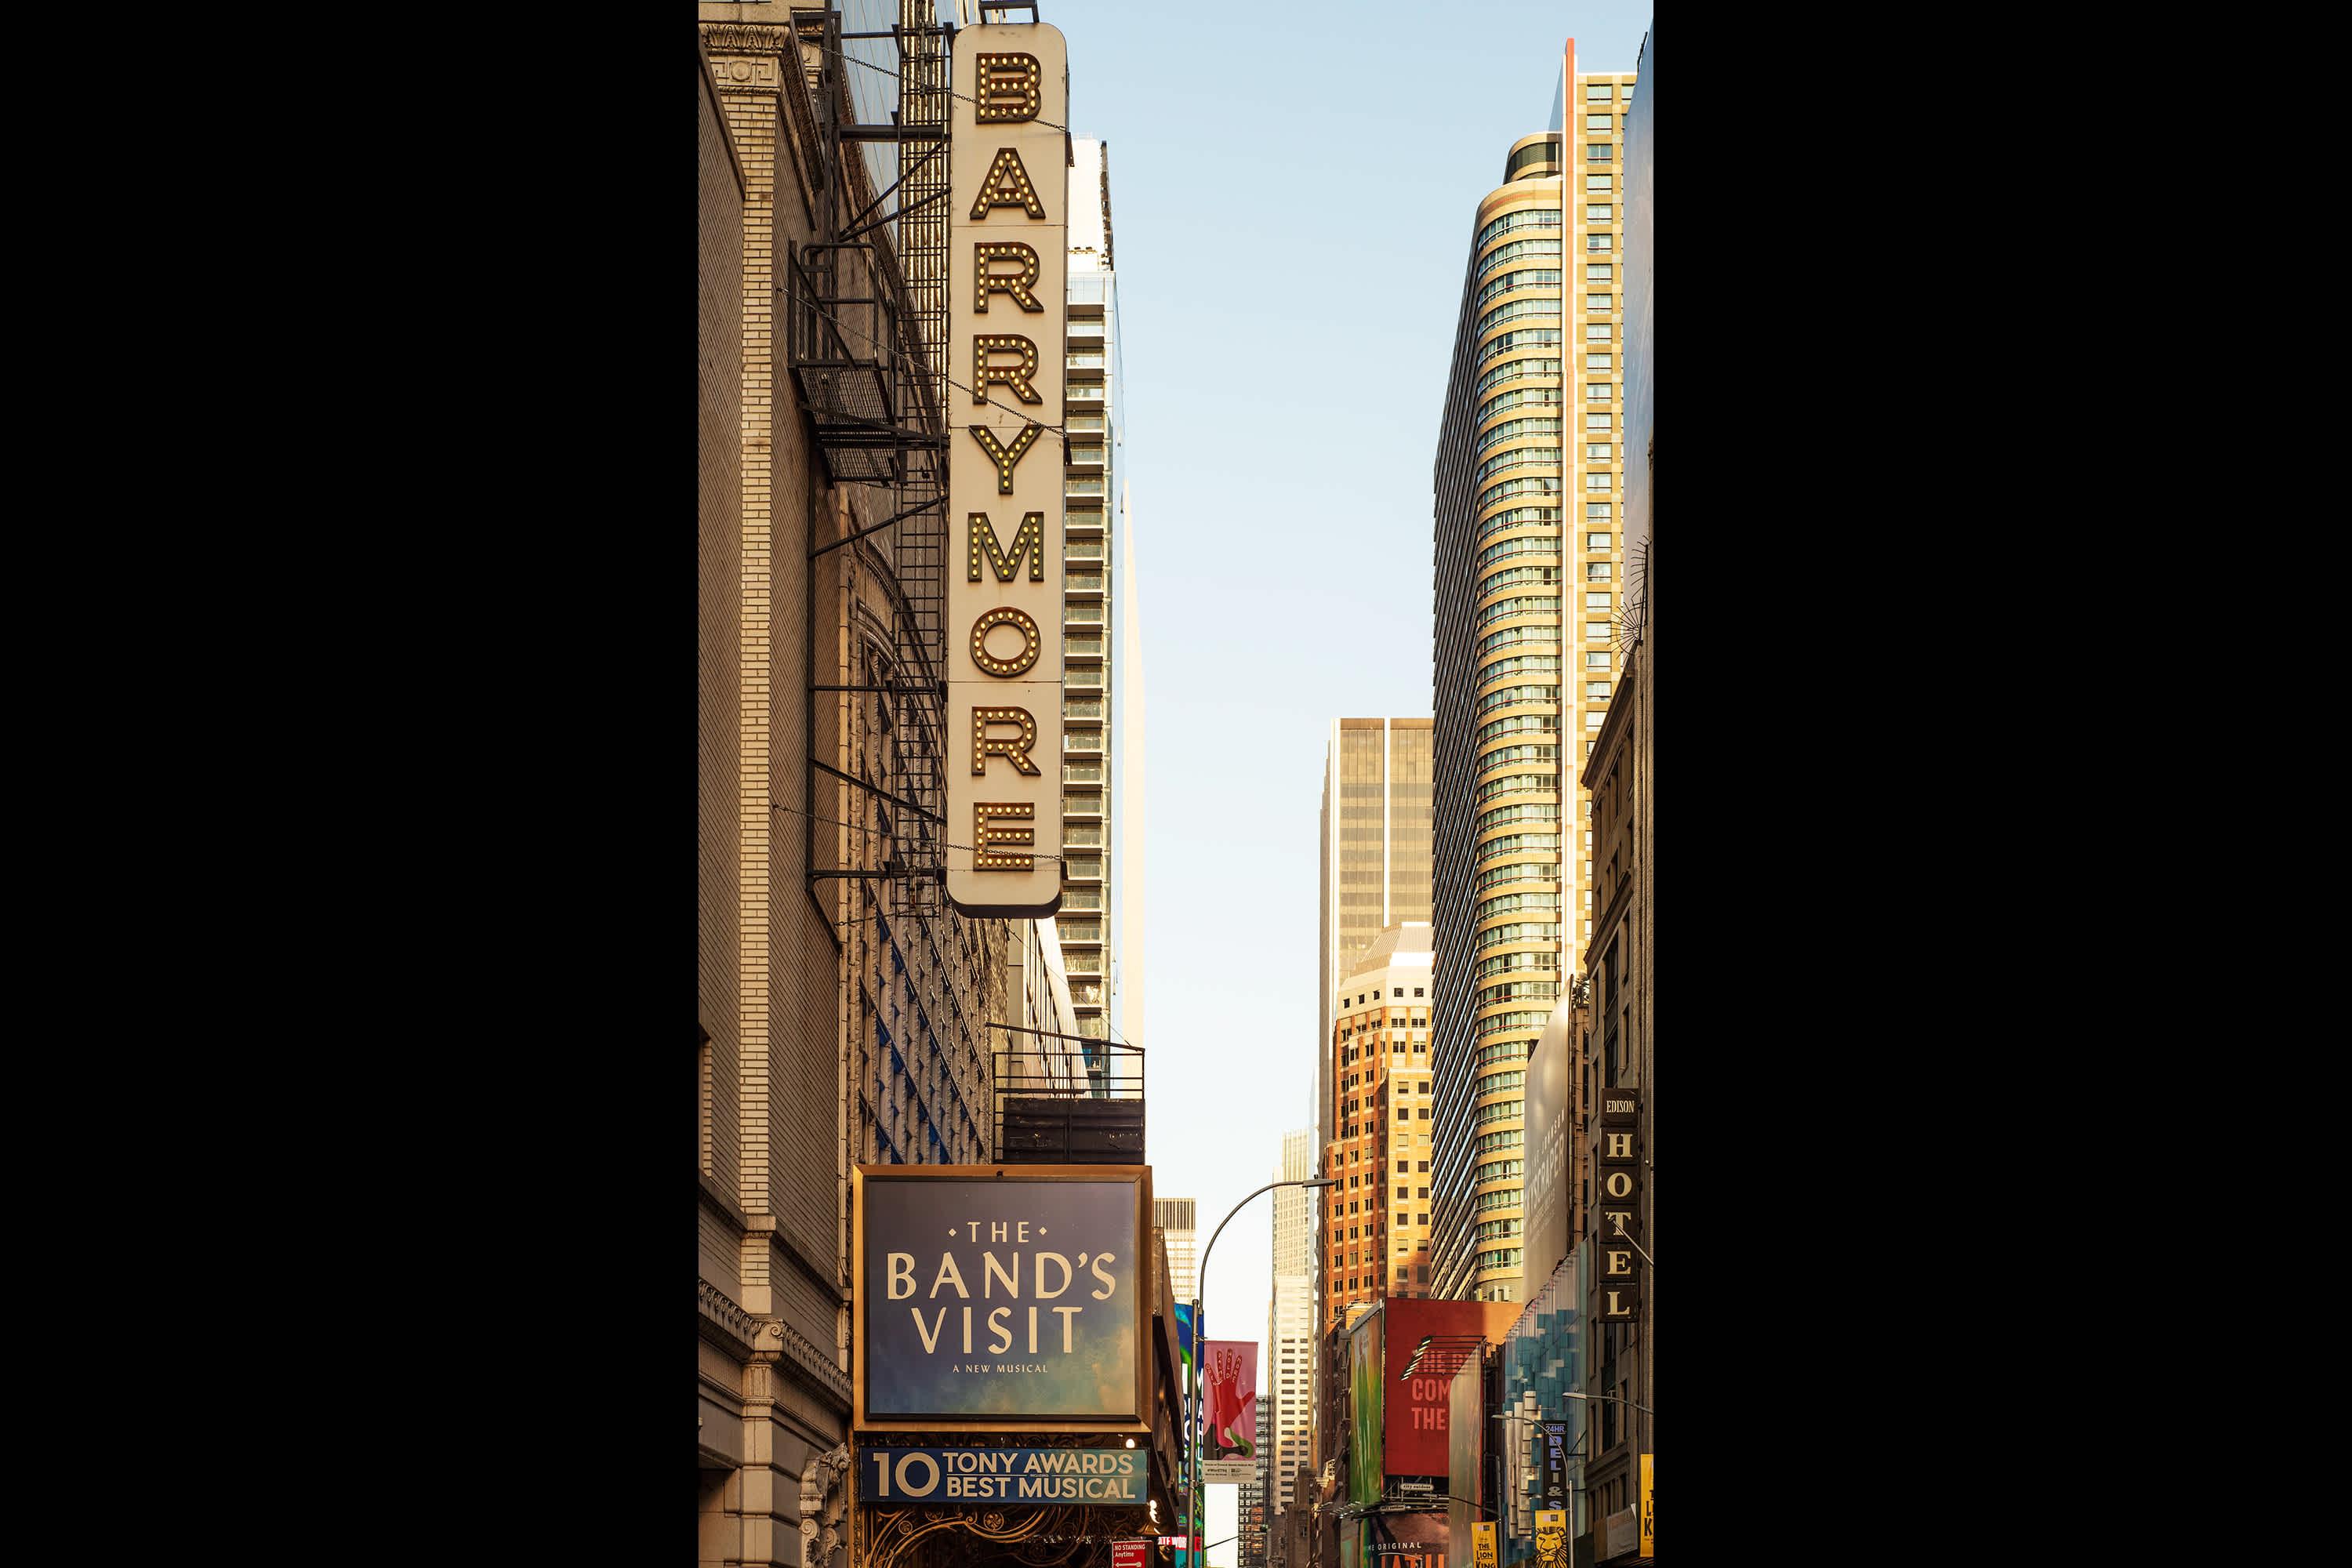 The-Bands-Visit-Broadway-Times-Square-Manhattan-NYC-Marquee-Theatre-Broadway-Week-David-La-Spin